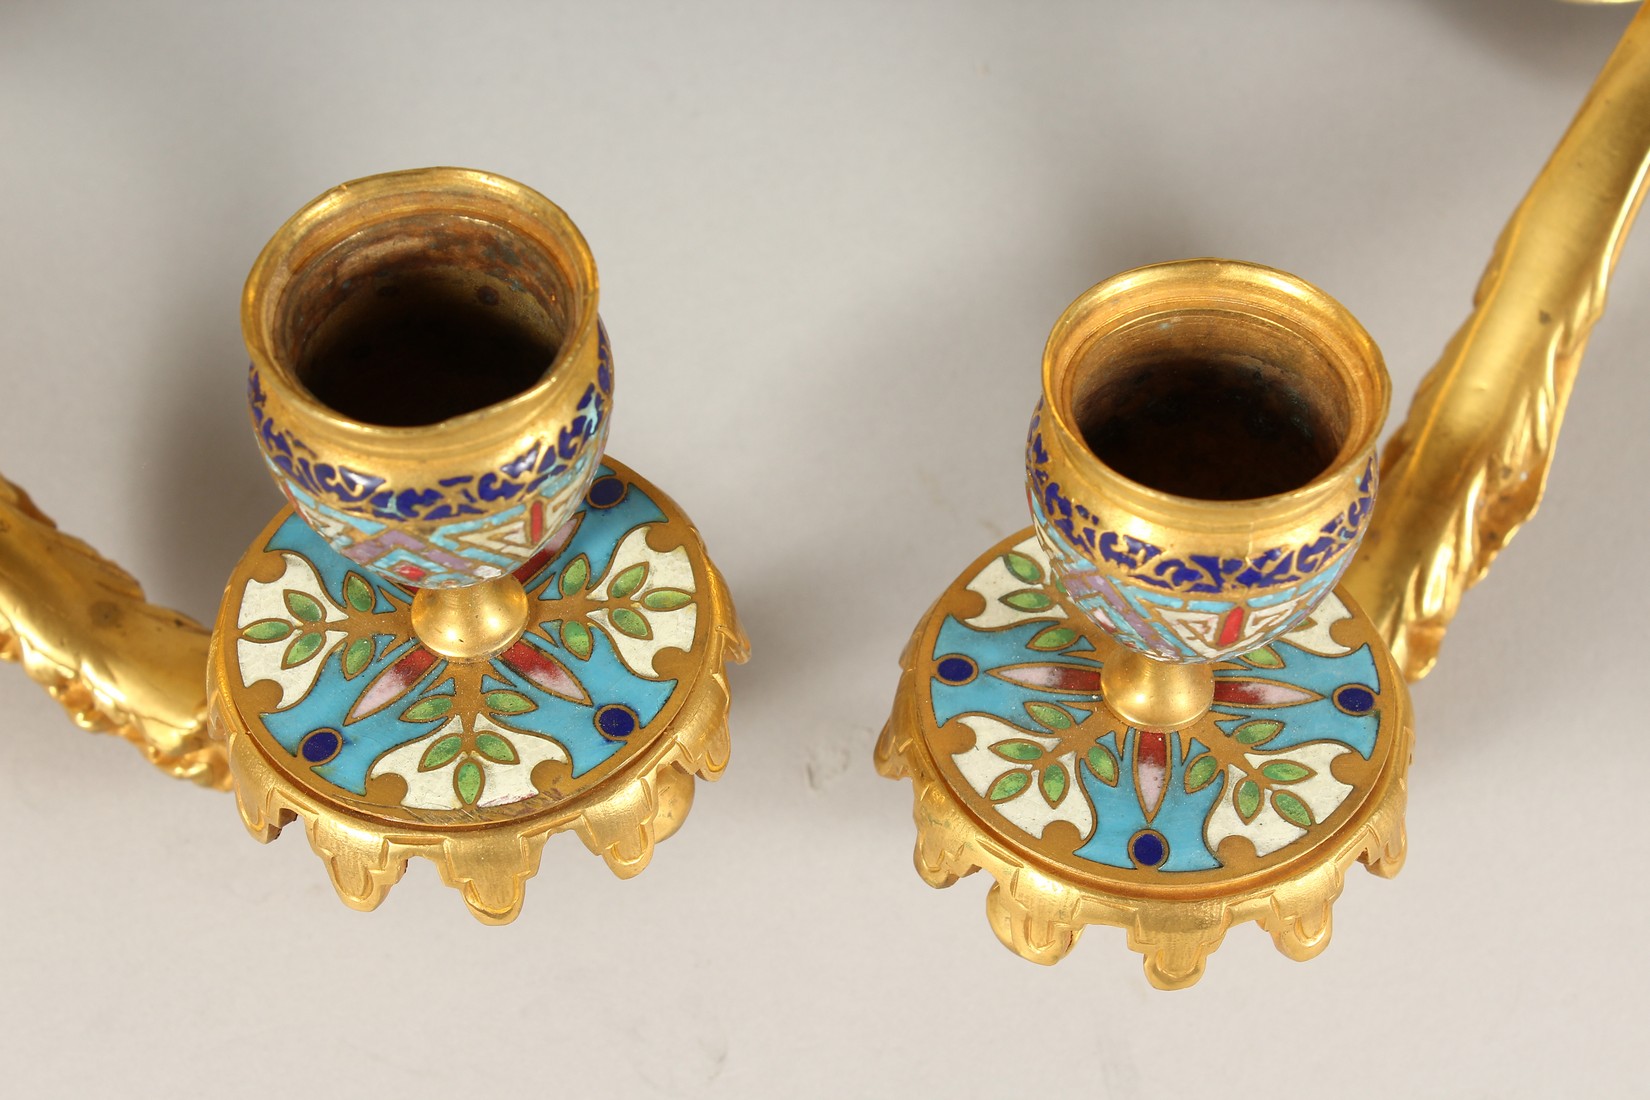 A SUPERB PAIR OF FRENCH ORMOLU AND ENAMEL TWO LIGHT WALL SCONCES WITH ACANTHUS AND SCROLLS 22ins - Image 5 of 7